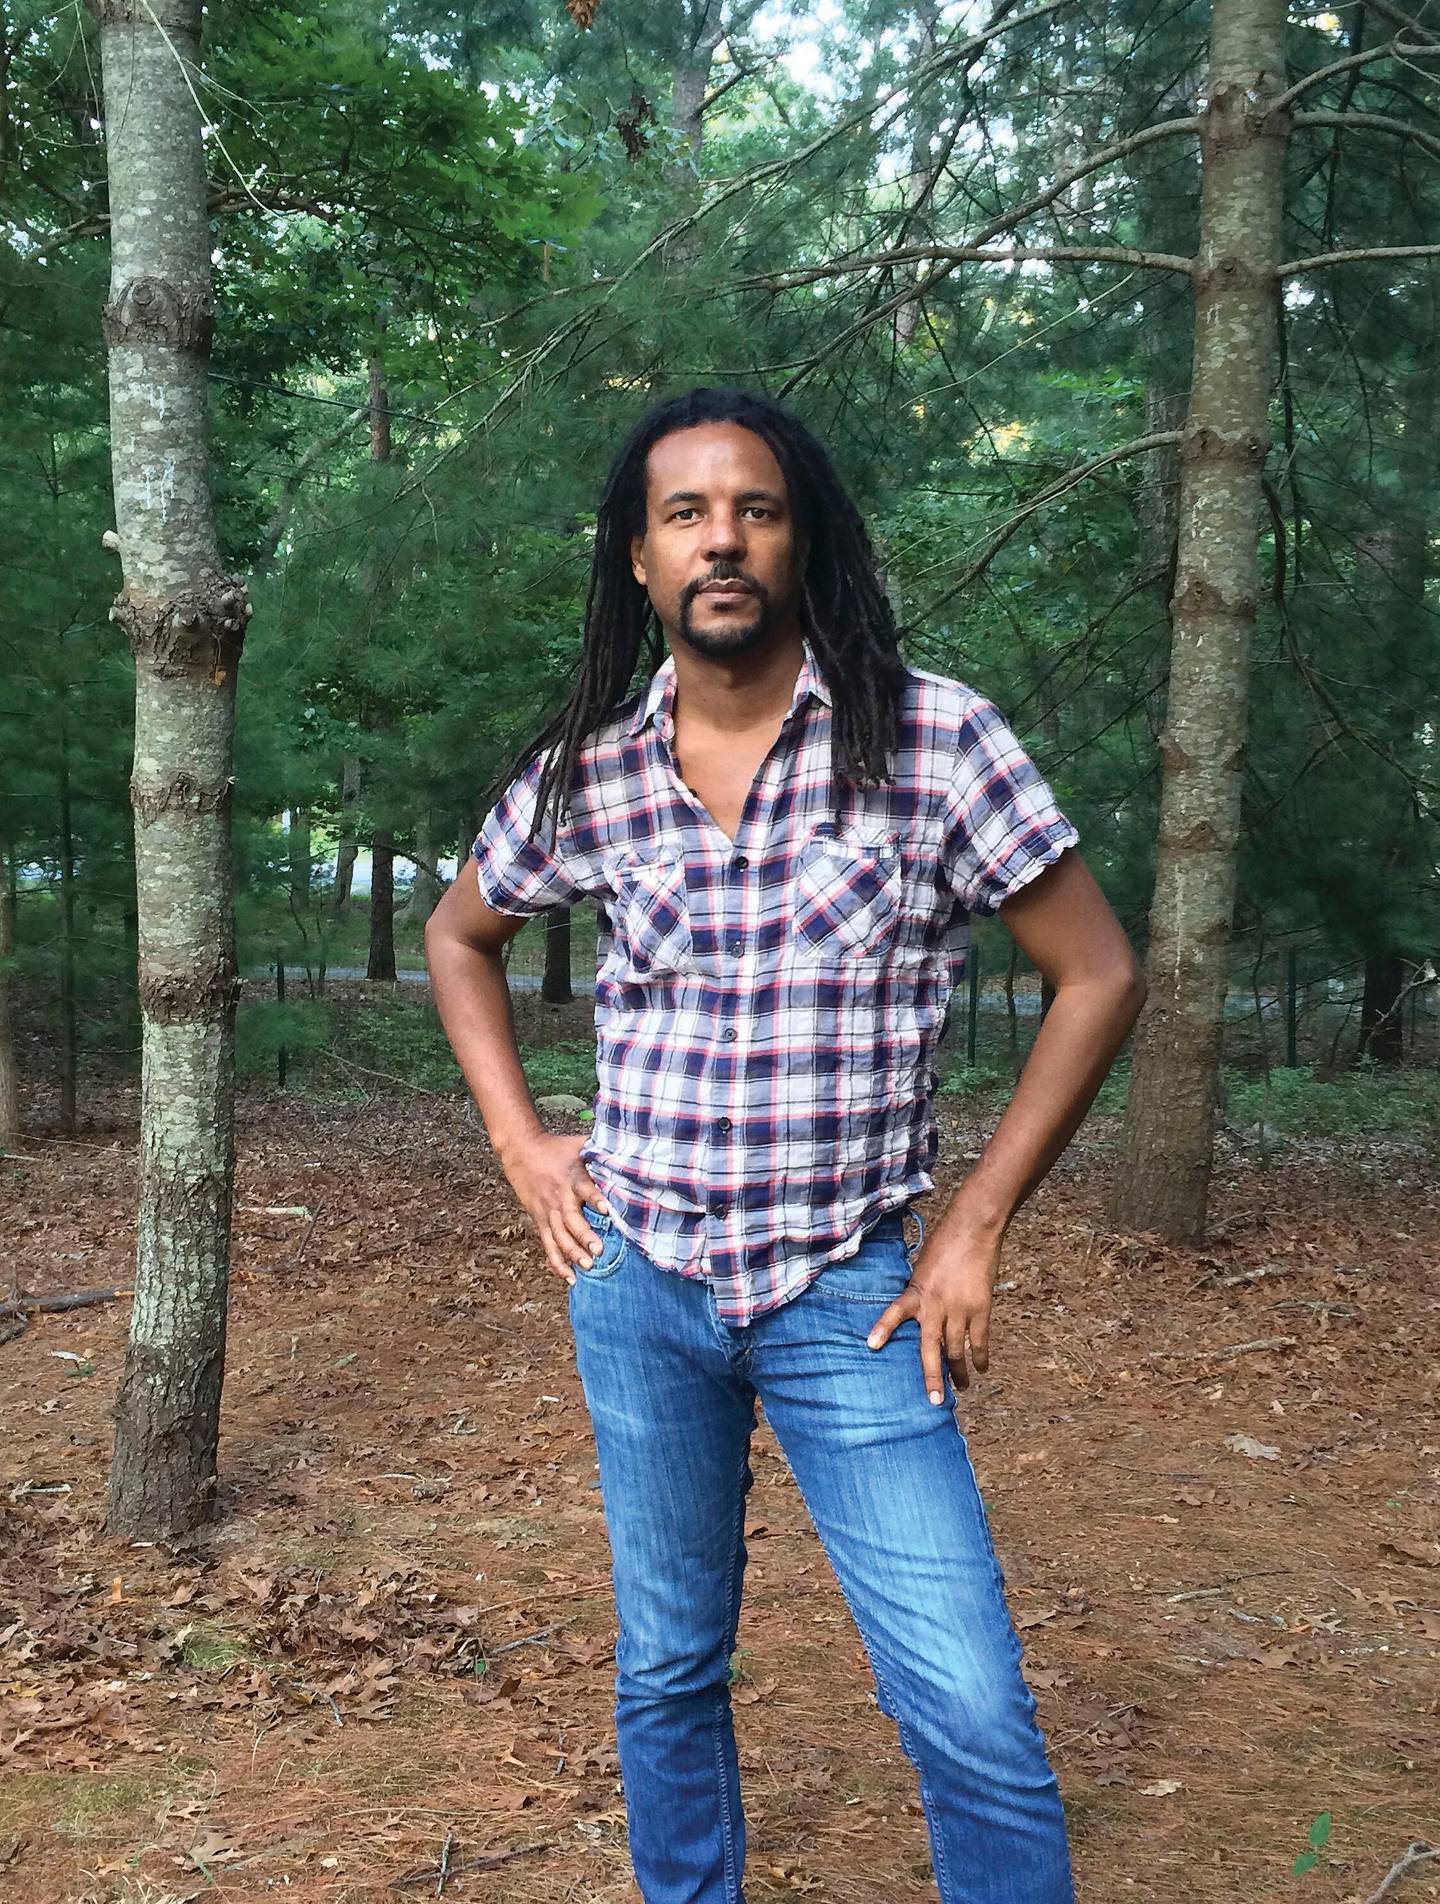 This image released by Doubleday shows a portrait of author Colson Whitehead, author of "The Nickel Boys," winner of the Pulitzer Prize for Fiction. (Madeline Whitehead/Doubleday via AP)